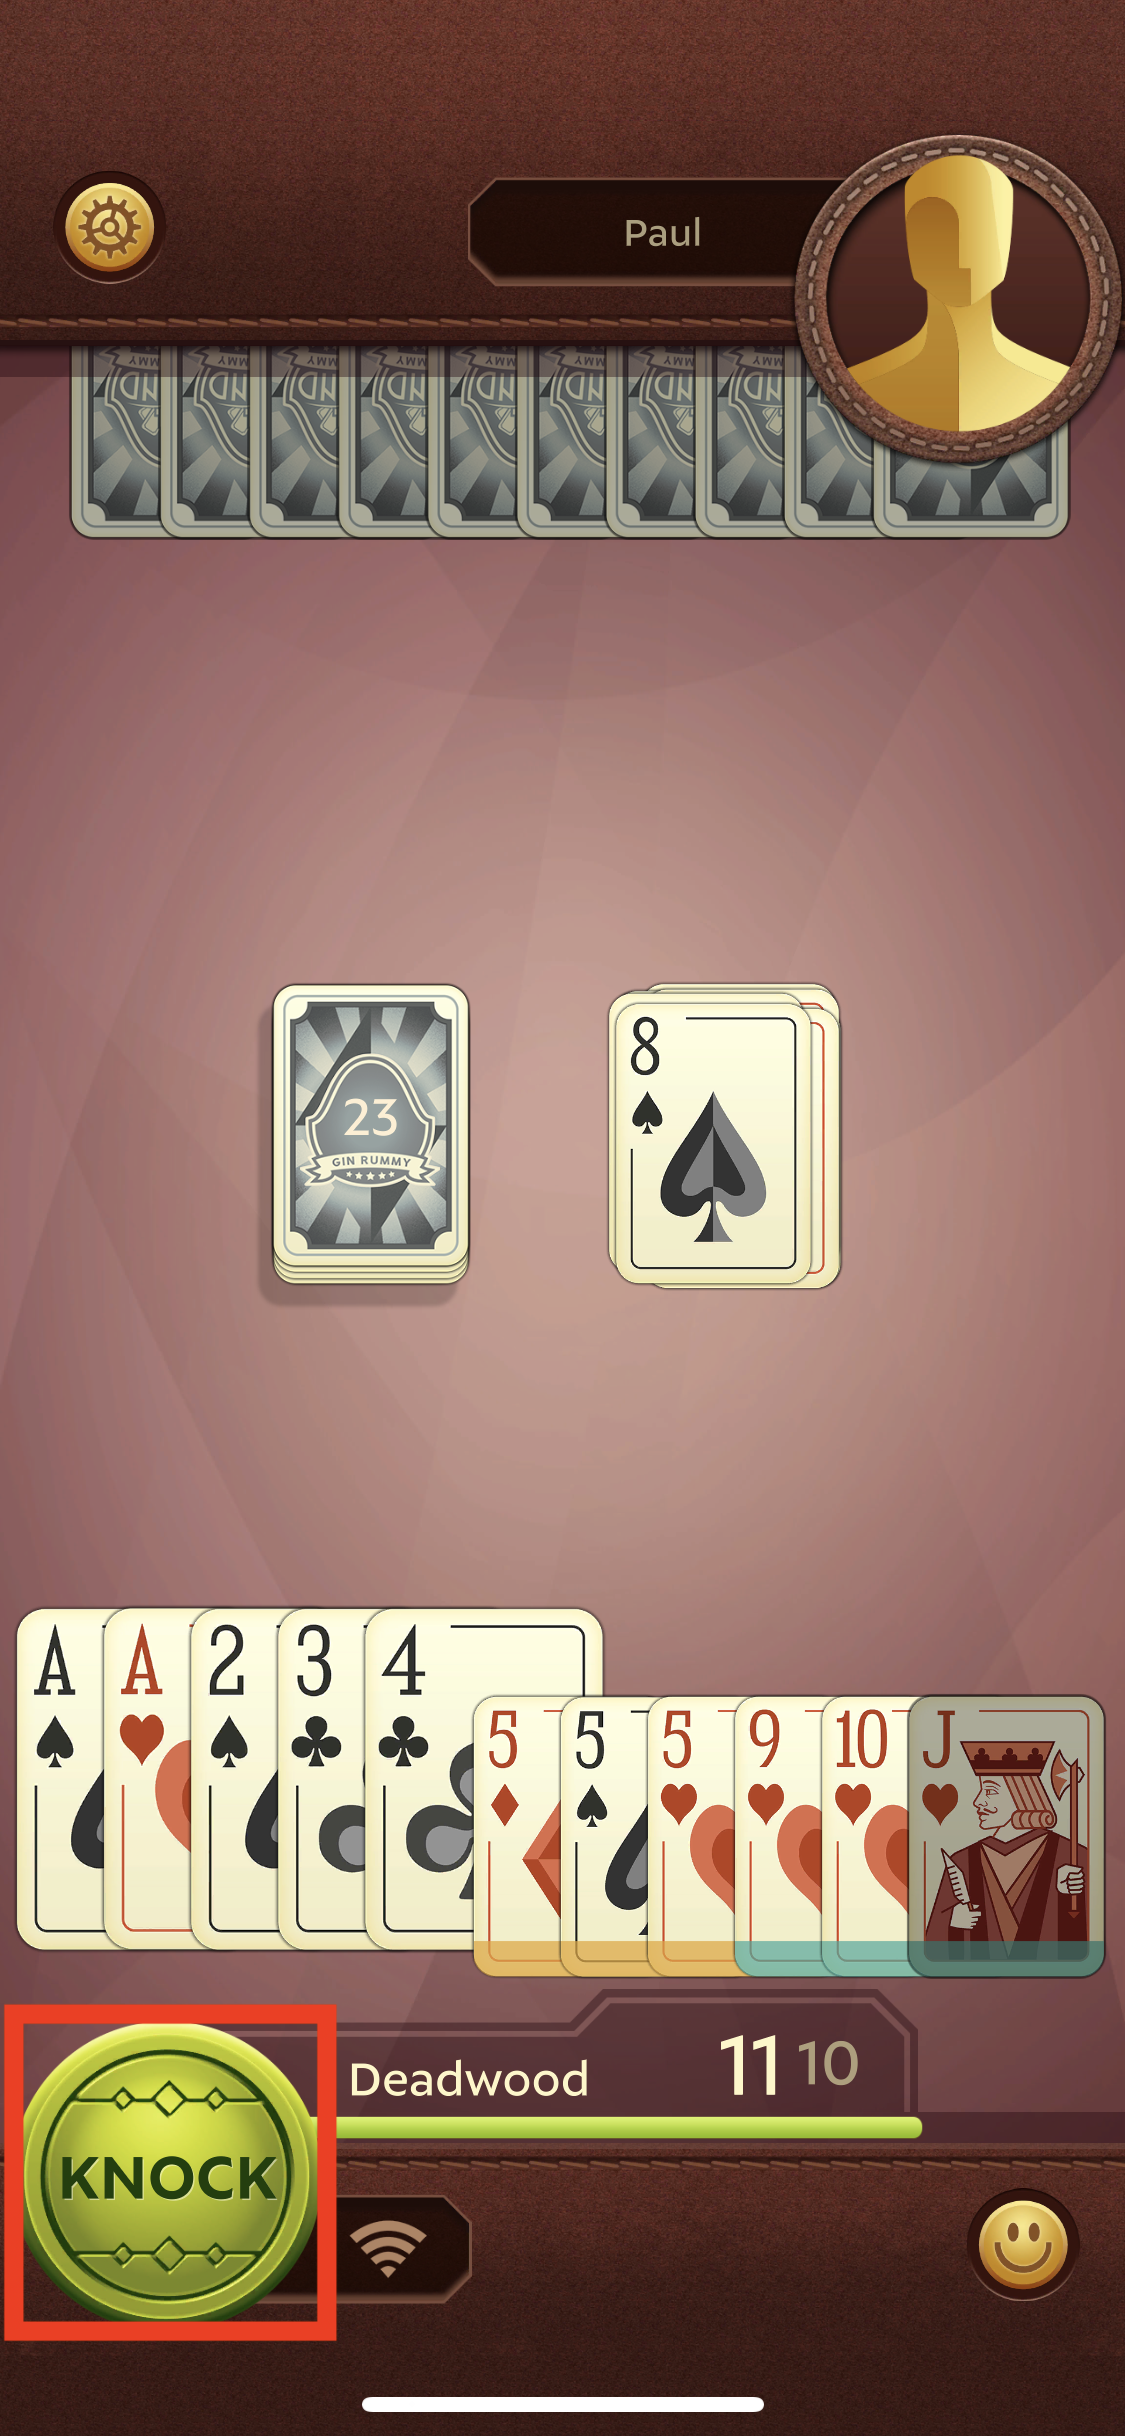 gin rummy app game that lets you count